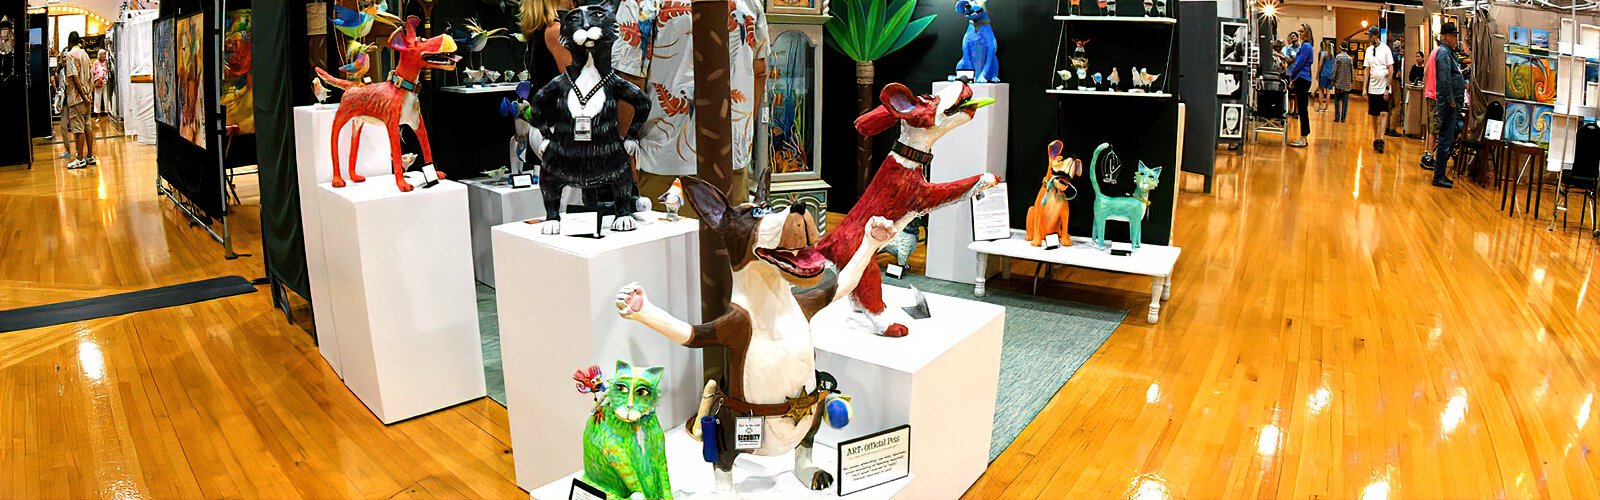 The ultimate low maintenance companions, the playful Art-Official Pets of St. Petersburg recycling artist Joyce Curvin greet visitors to her corner booth at PAVA’s Cool Art Show at The Coliseum in St. Petersburg.